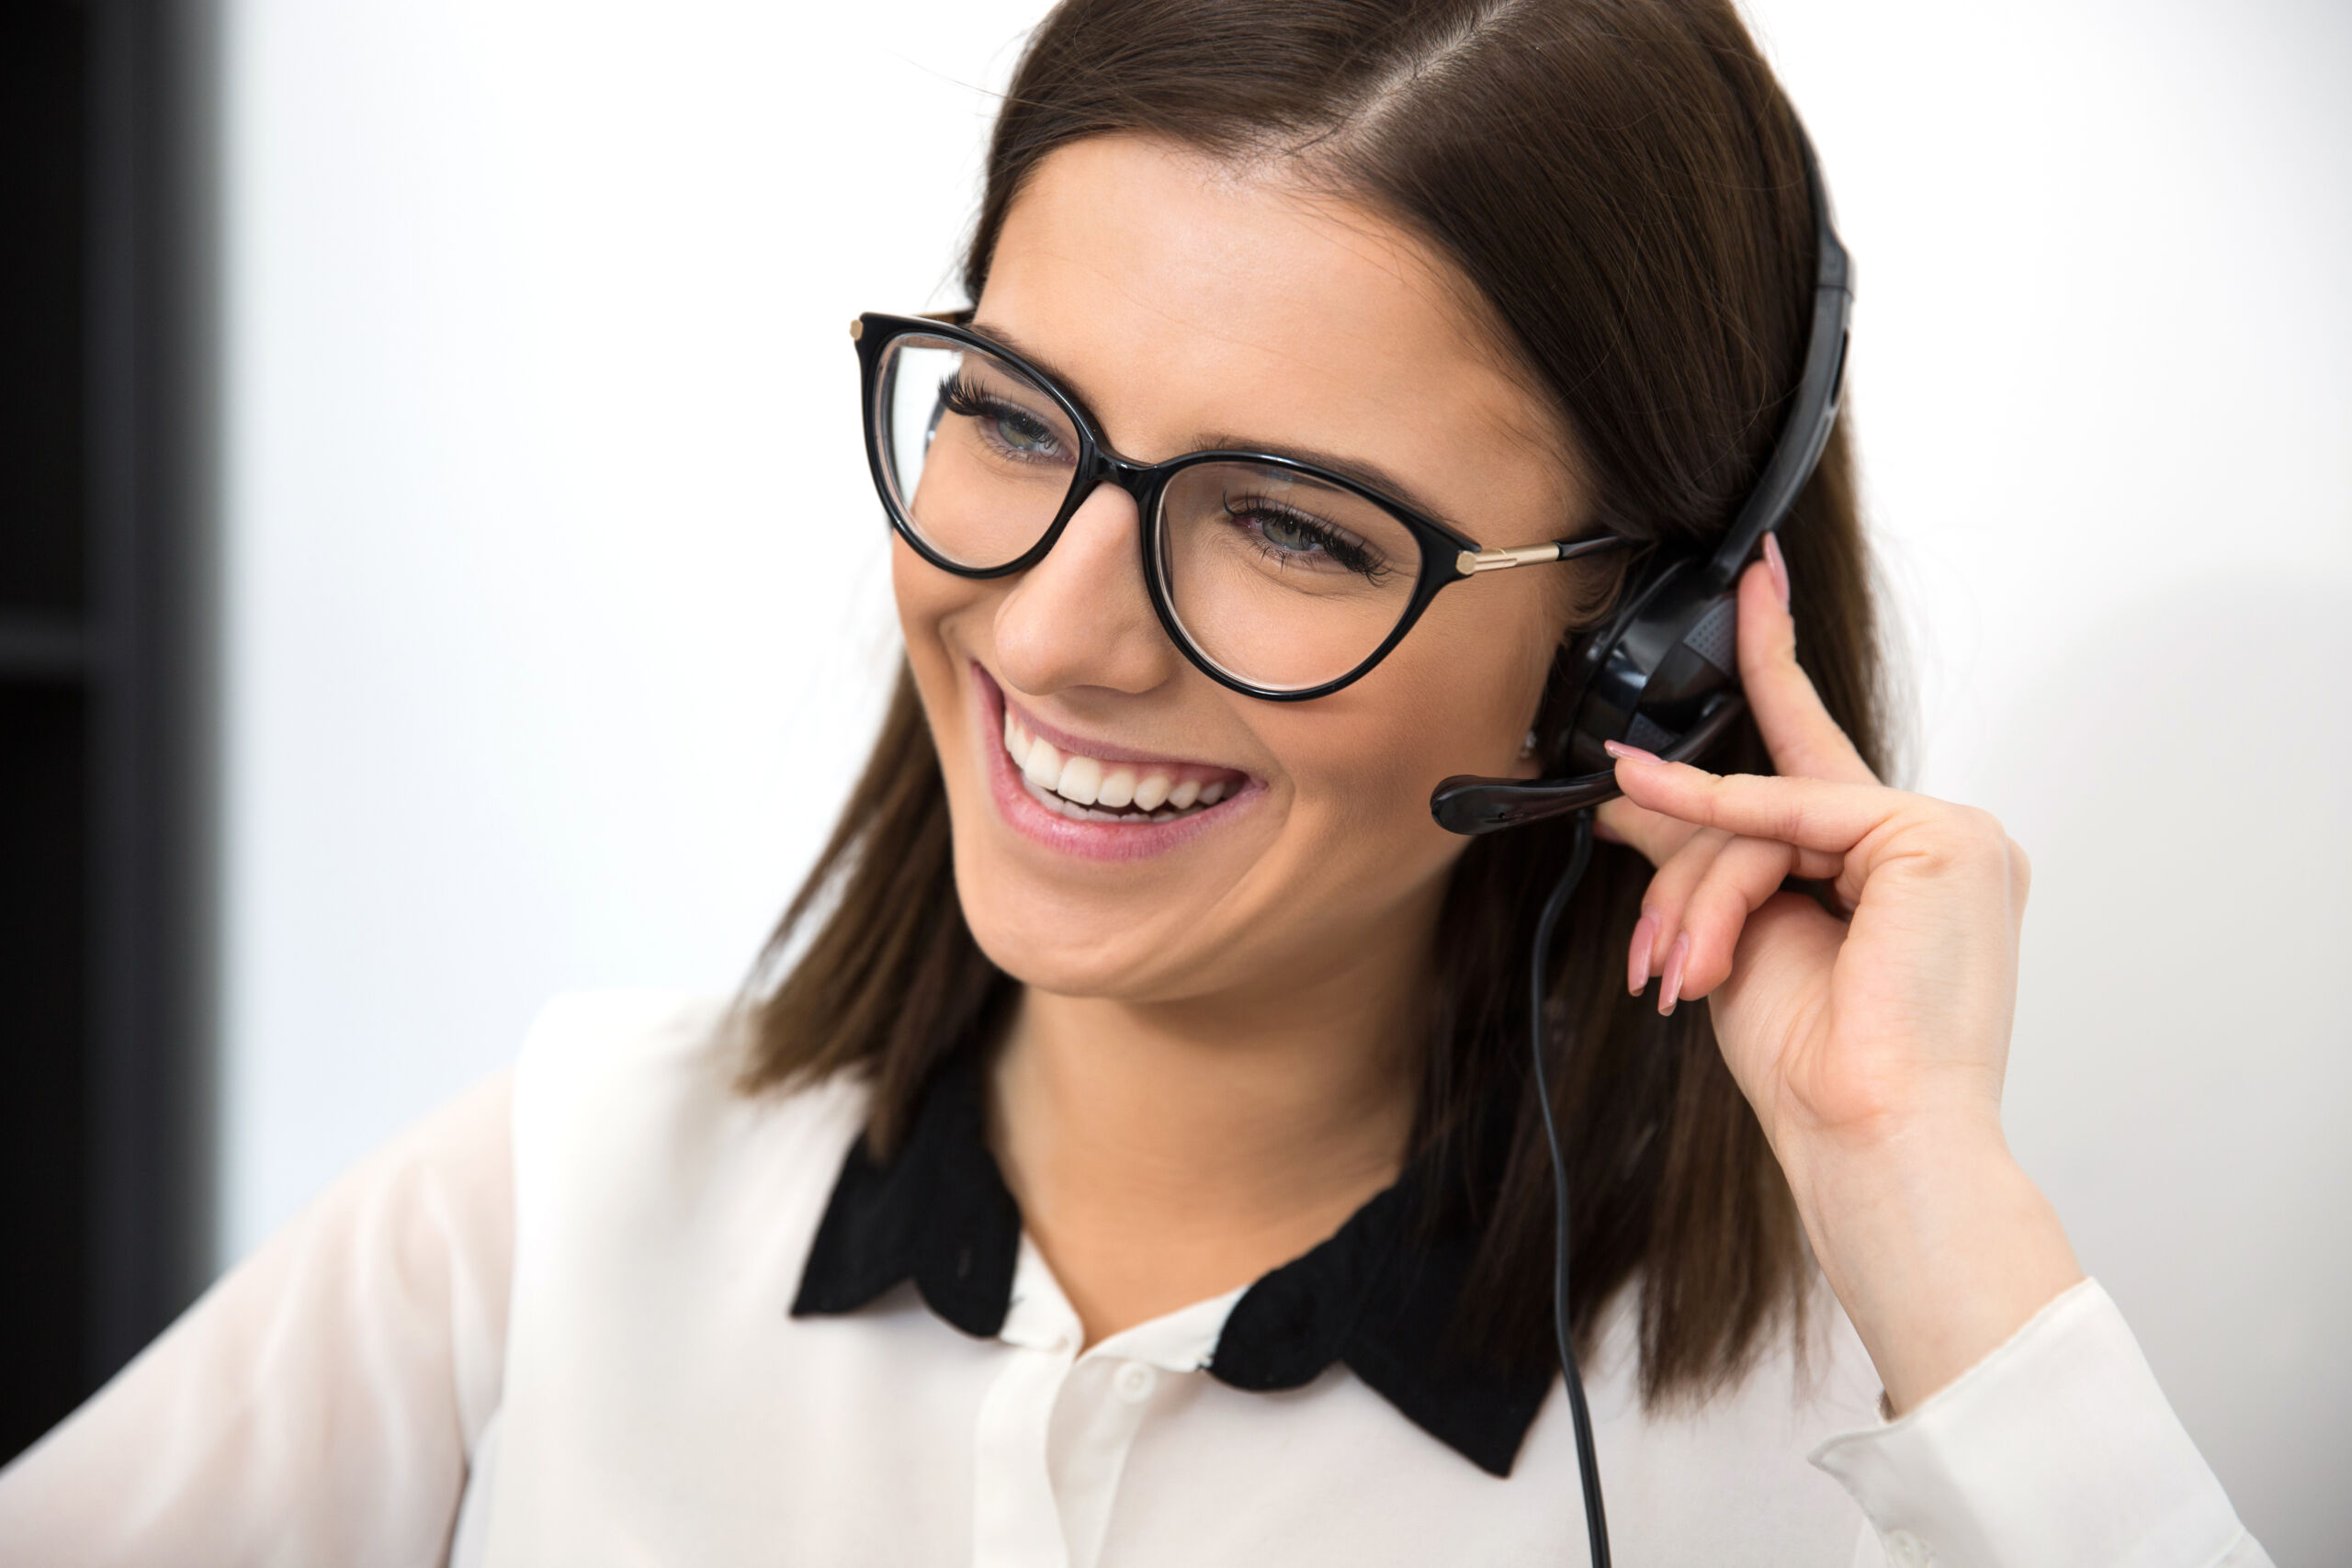 Work at Home Customer Support Jobs with Grow Therapy